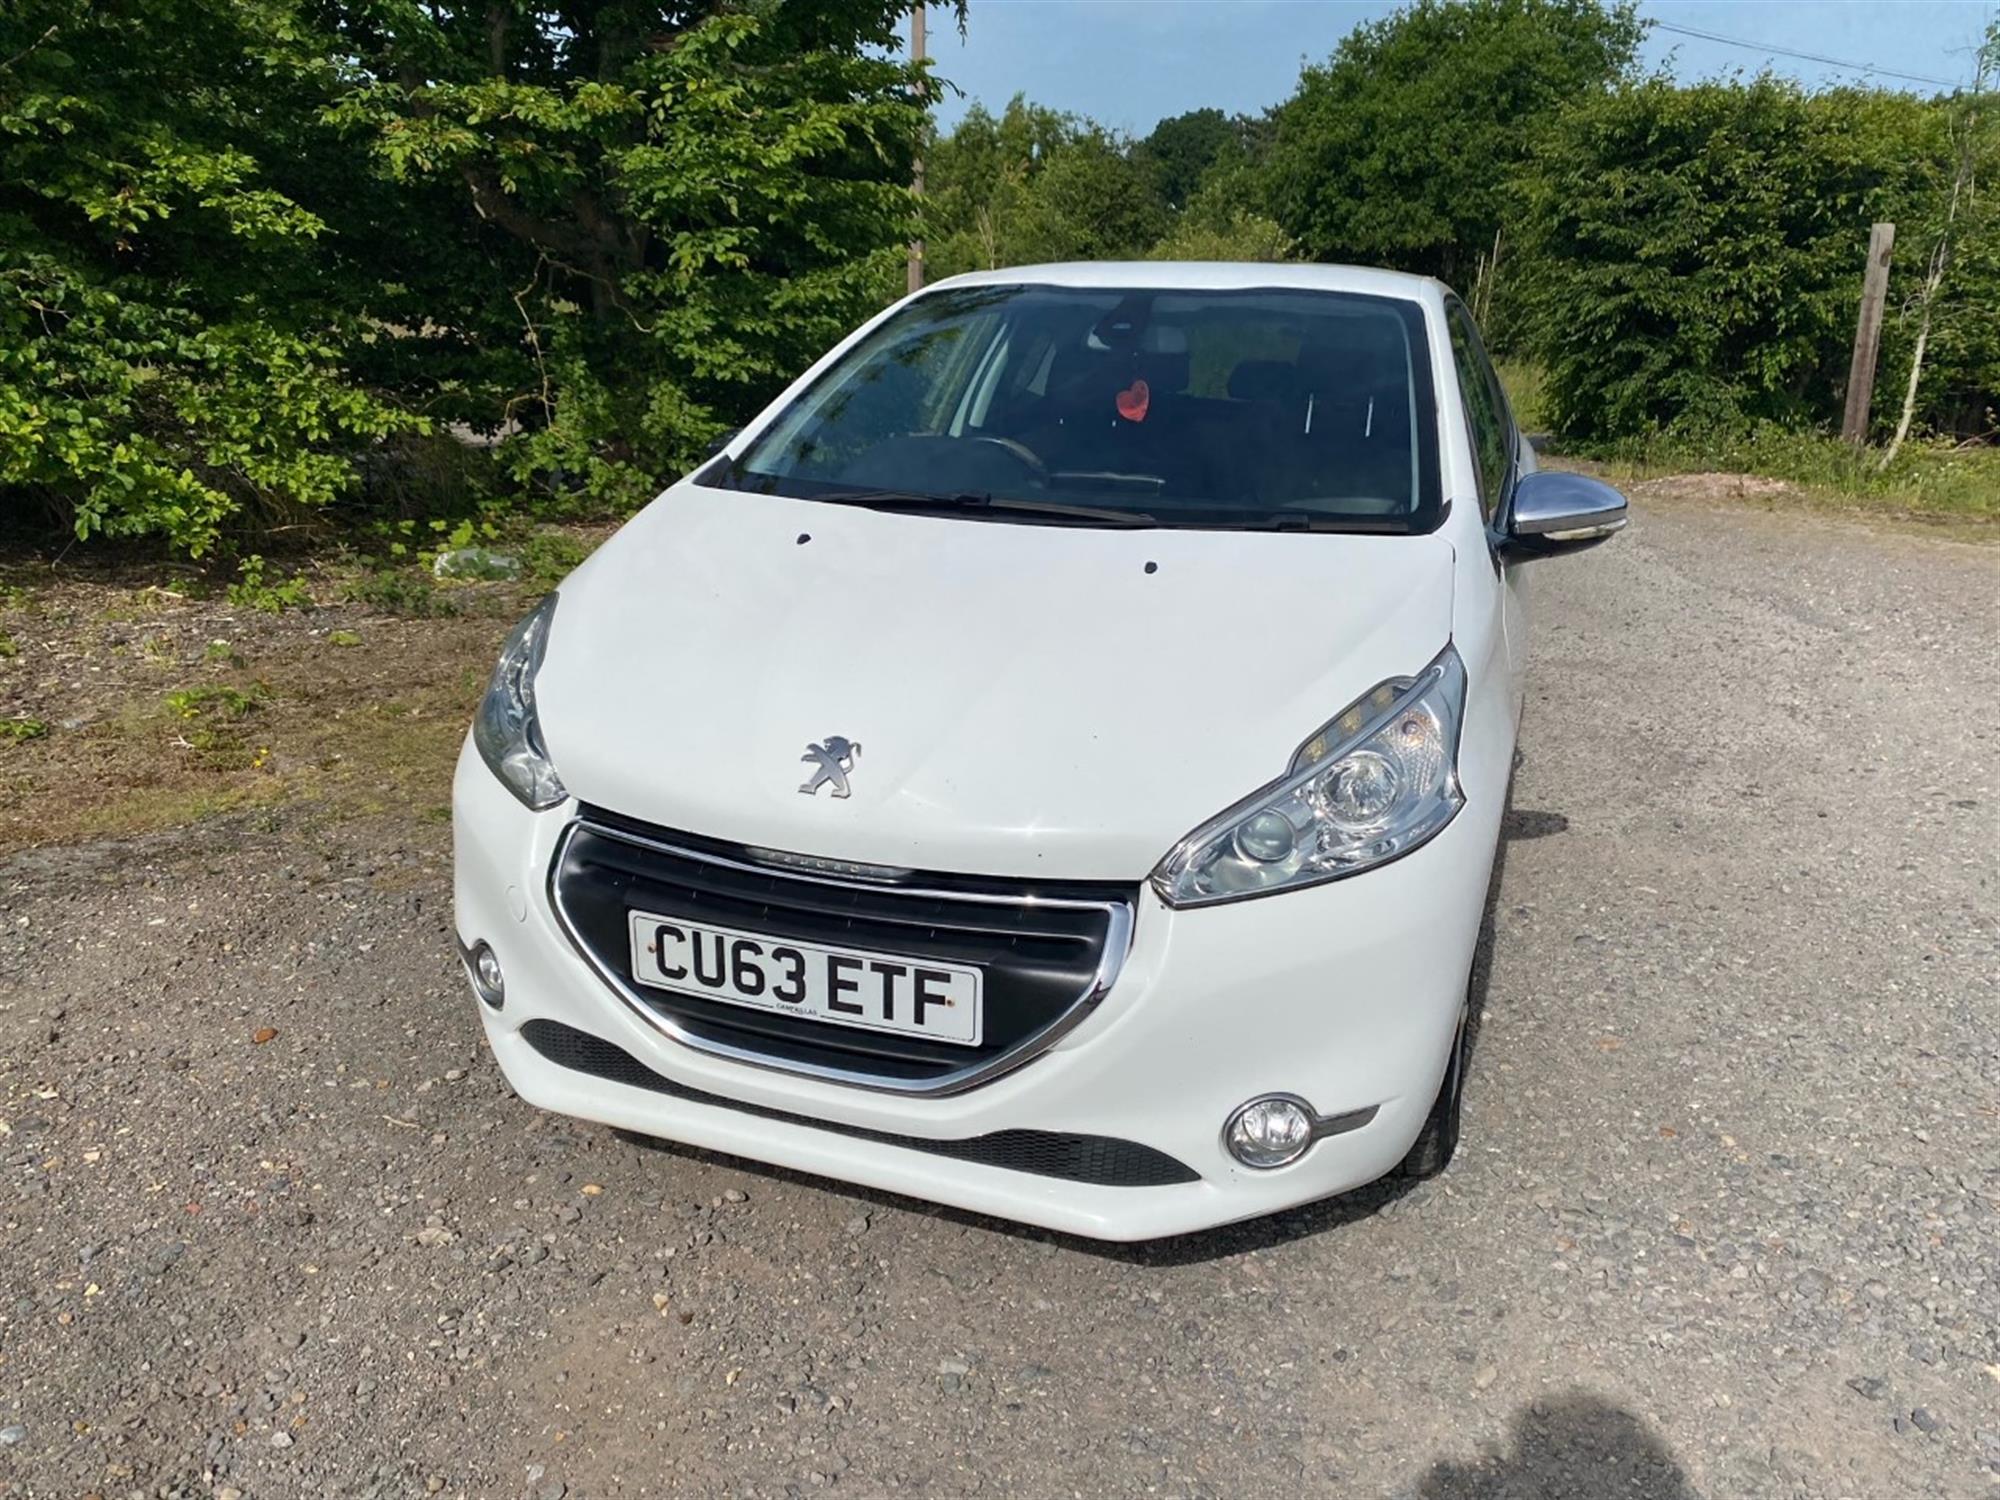 Peugeot 208 Allure 1.4 E-HDI Automatic, 111,998 miles, Only 2 owners from new, 3 door finished in